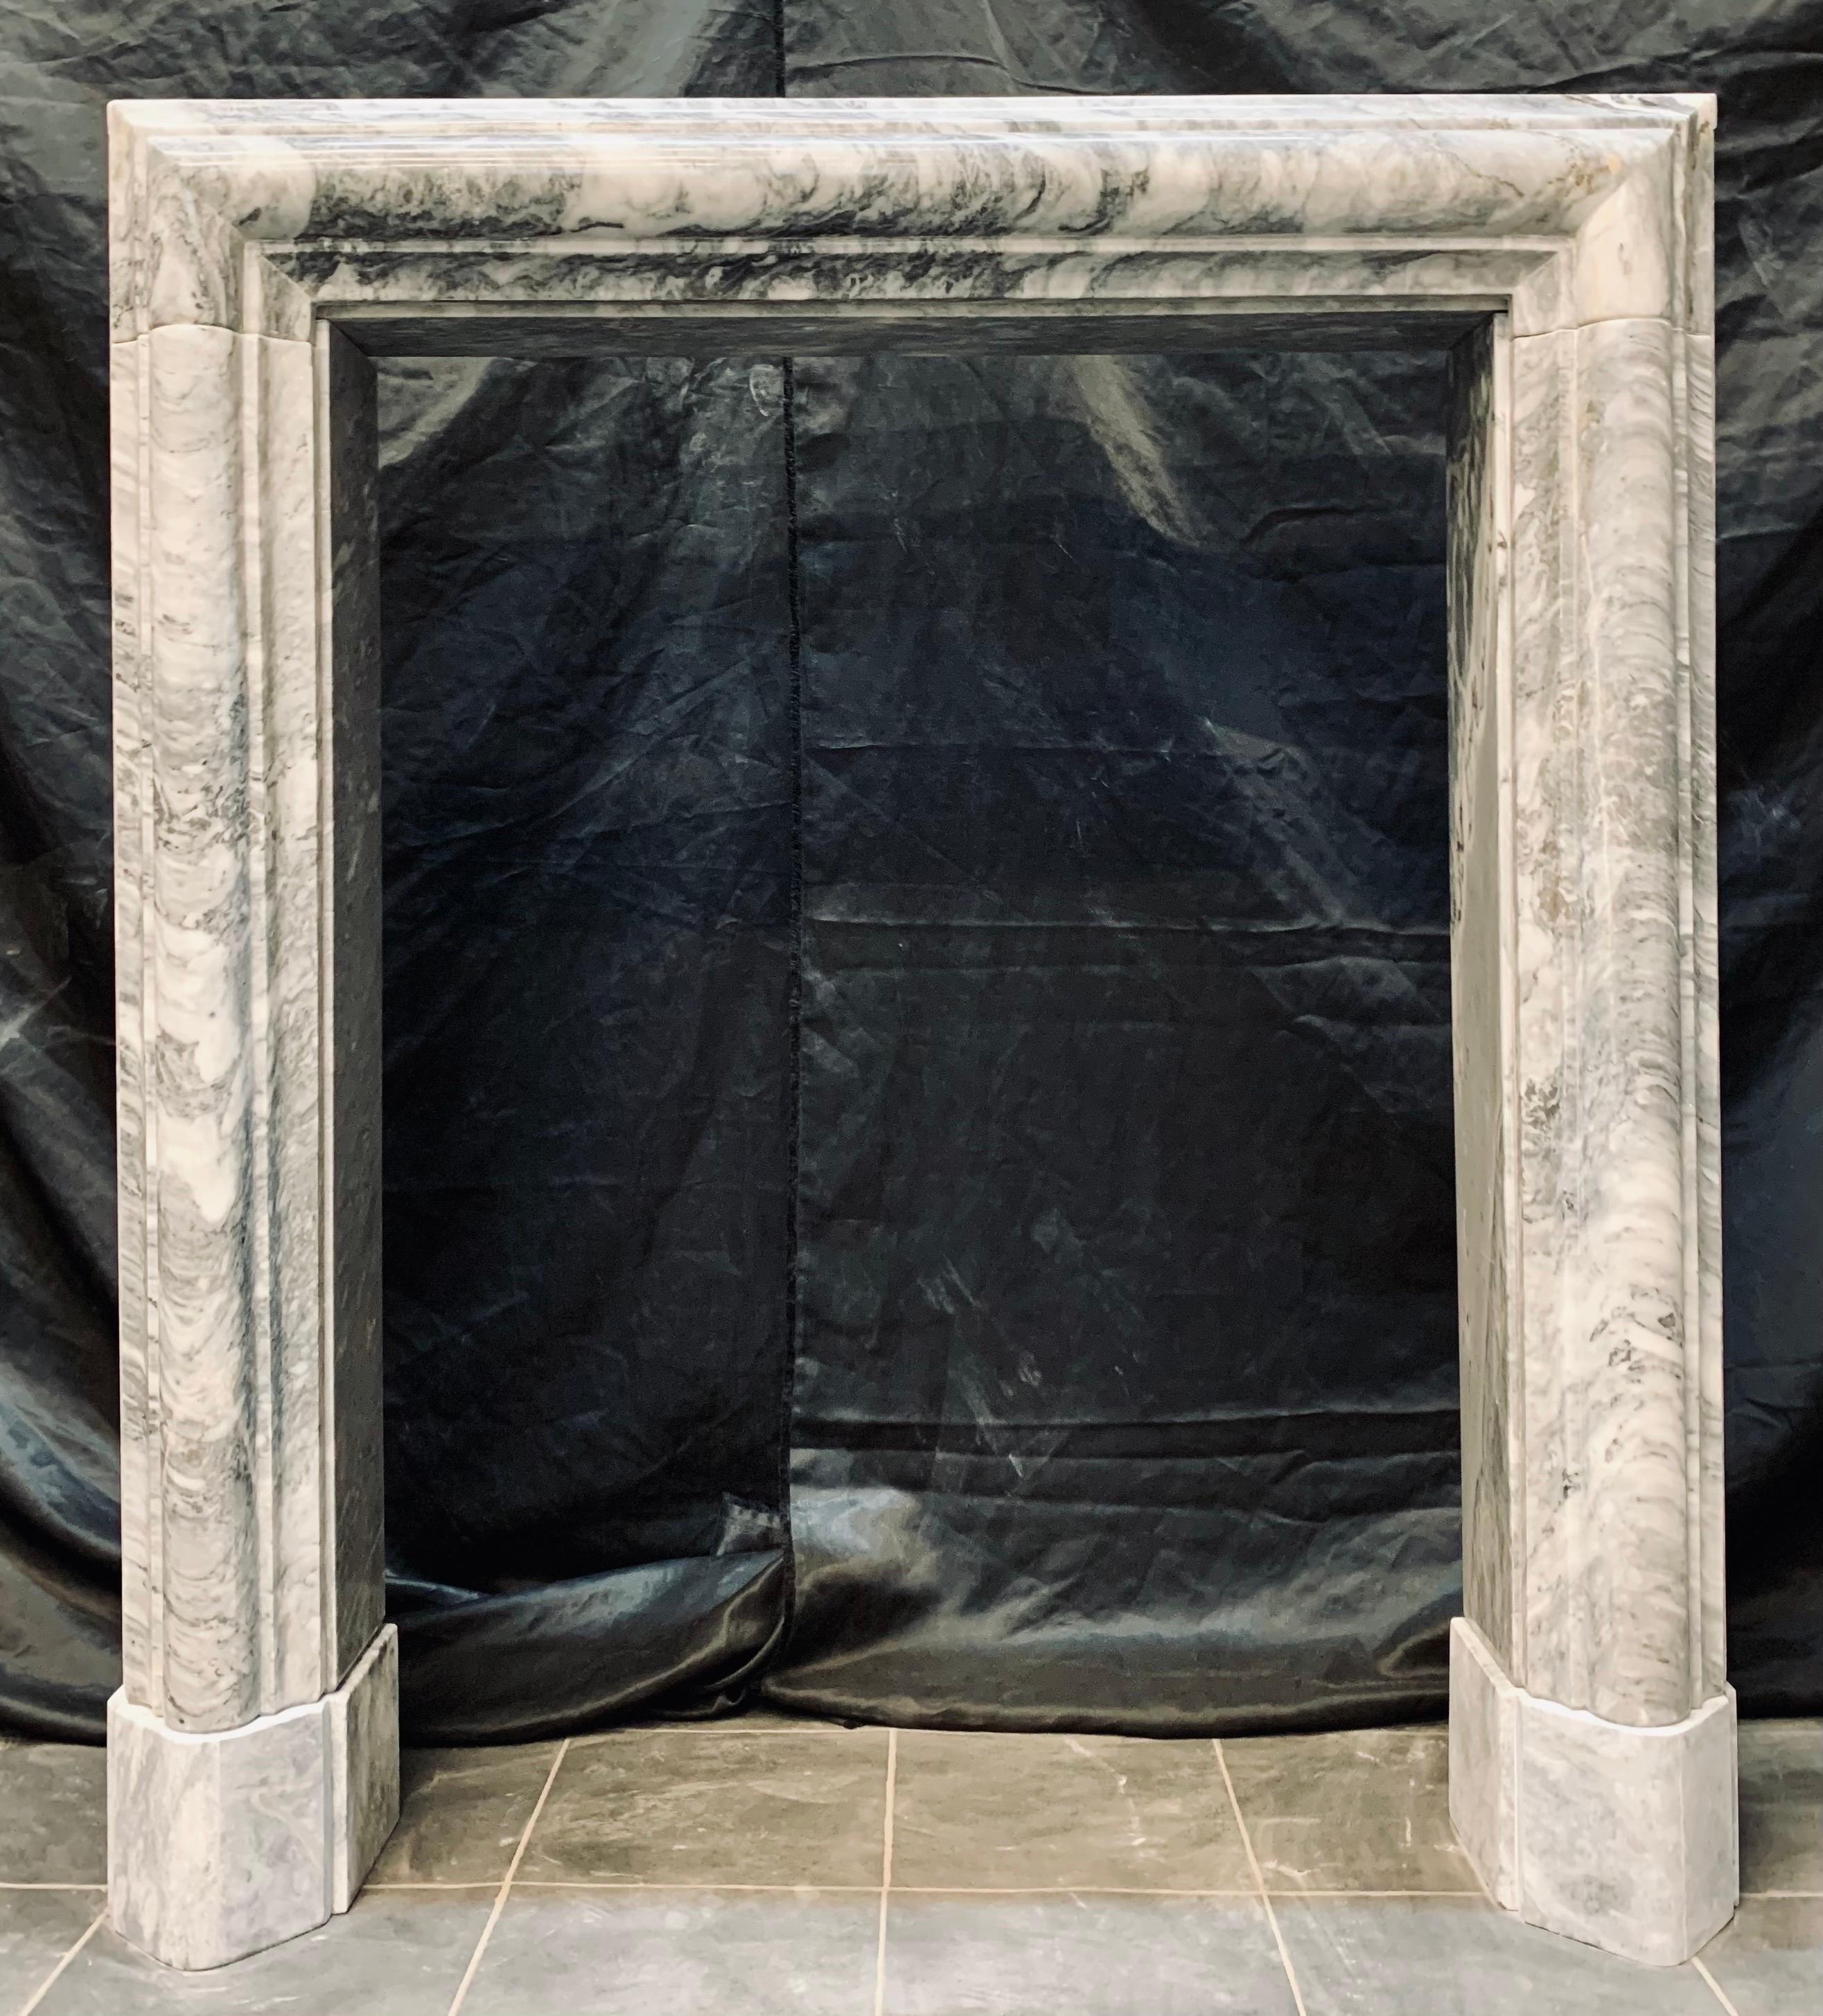 A tall 19th century manner solid Bardigilo bolection marble fireplace surround. A well carved bolection shaped frieze section rests above a set of matching bolection jambs, and a generous return section gives this wonderful piece depth, all